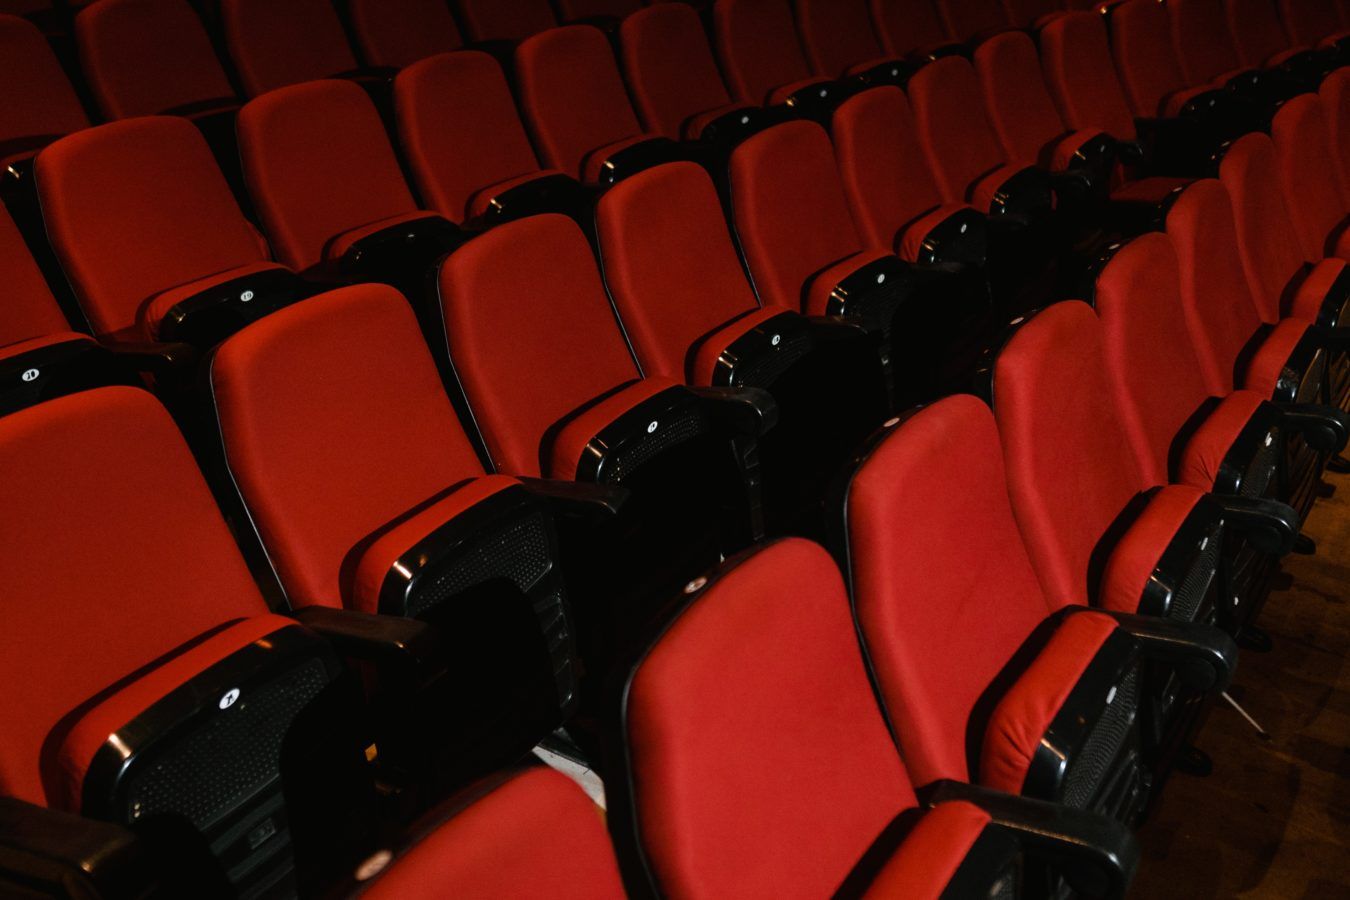 SF Cinema is now renting out its movie theatres to gamers